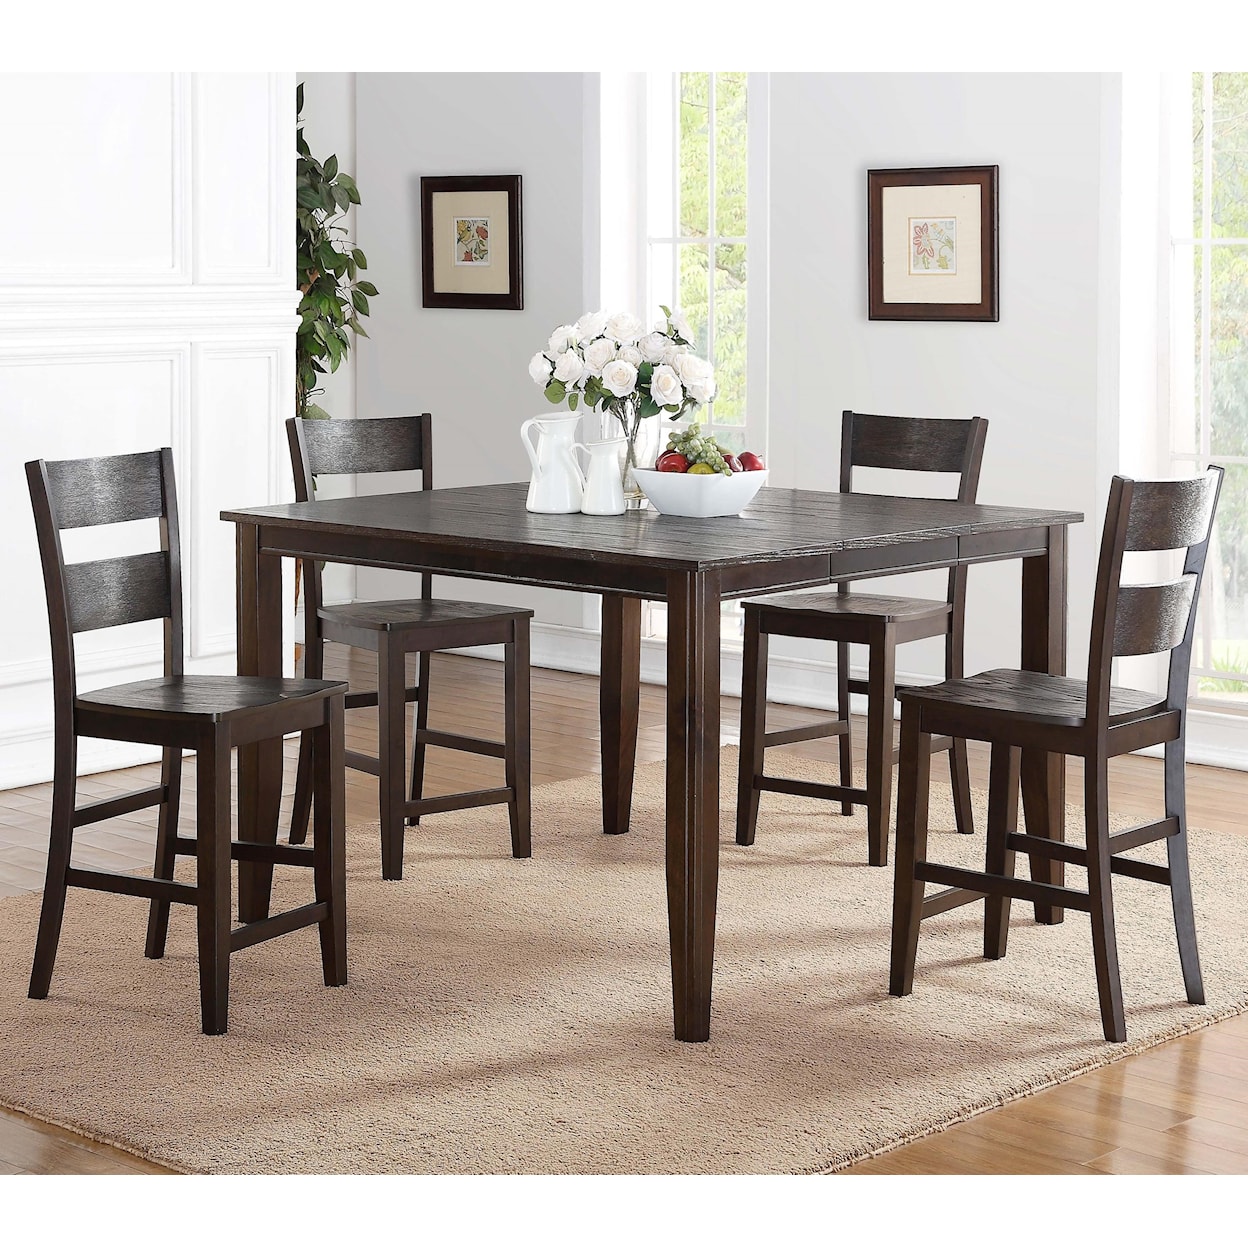 Holland House 8204 5 Piece Counter Height Dining Set